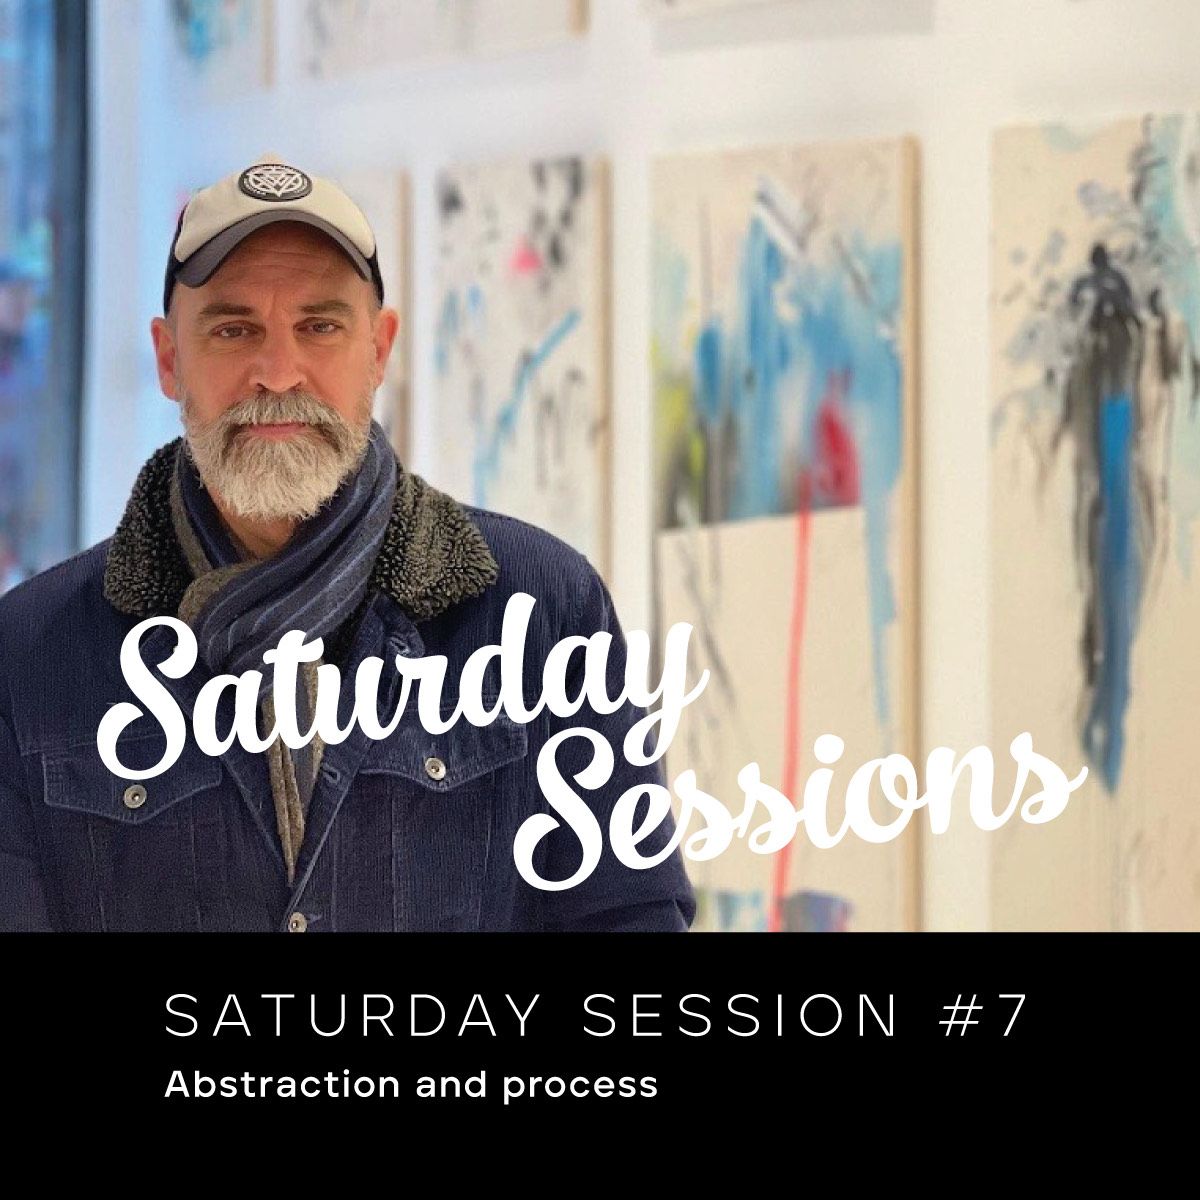 Saturday Session #7 - Abstraction & Process with Iain H. Williams